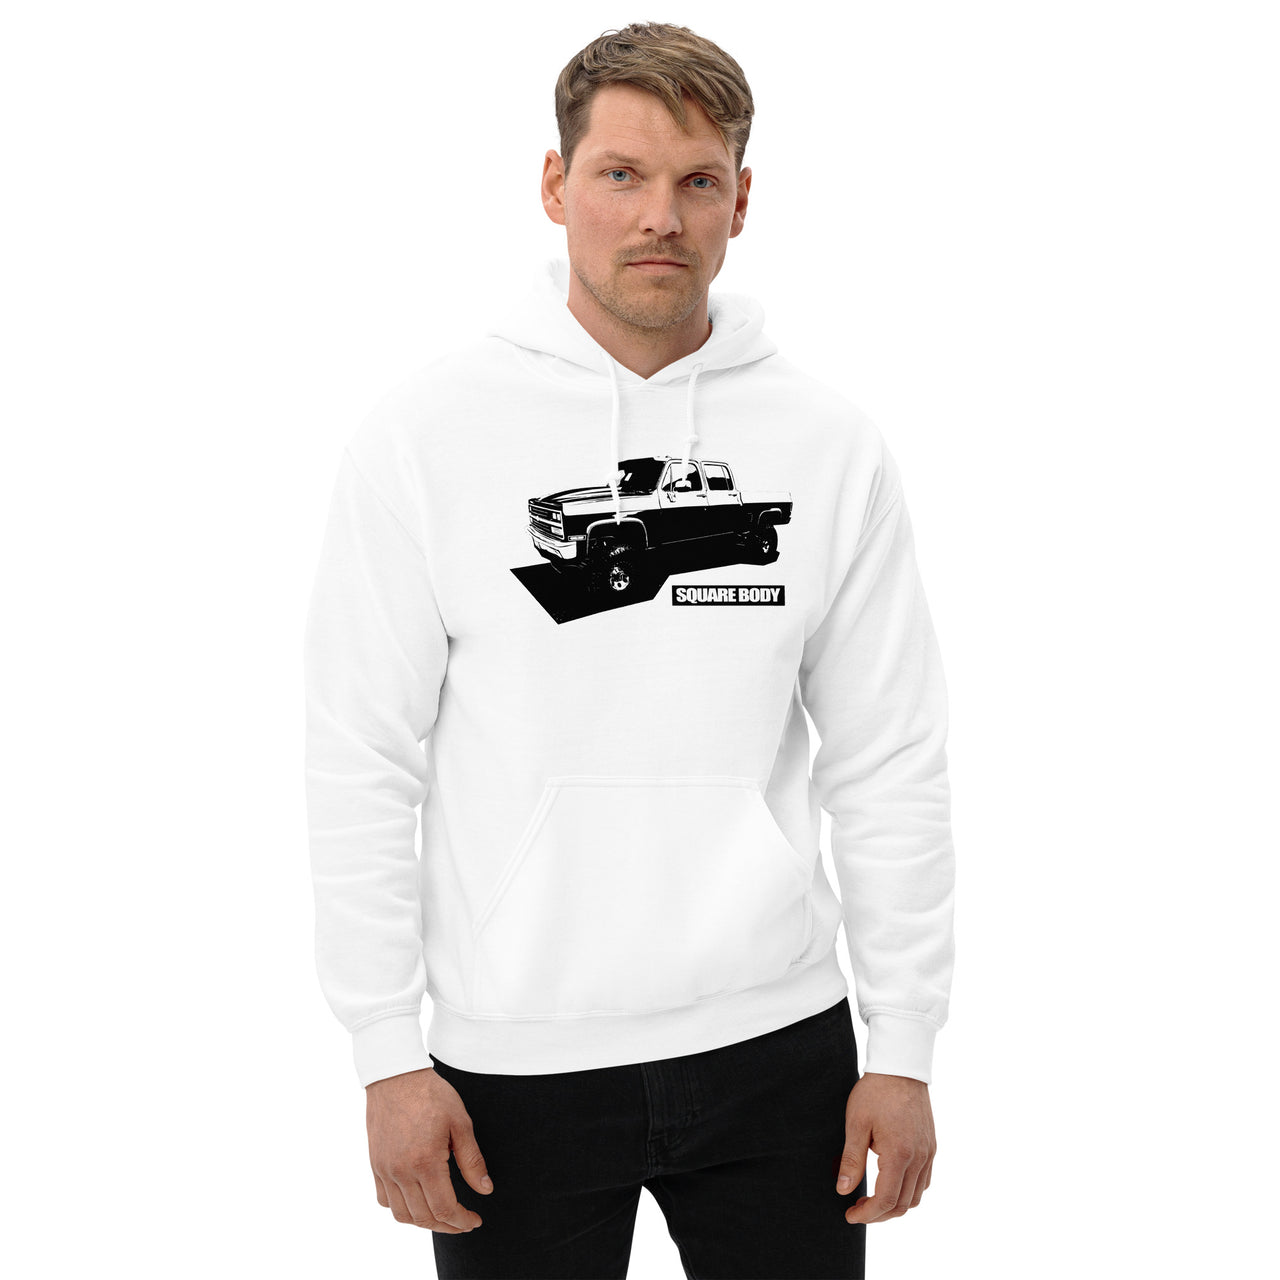 Squarebody Crew Cab Truck Hoodie modeled in white